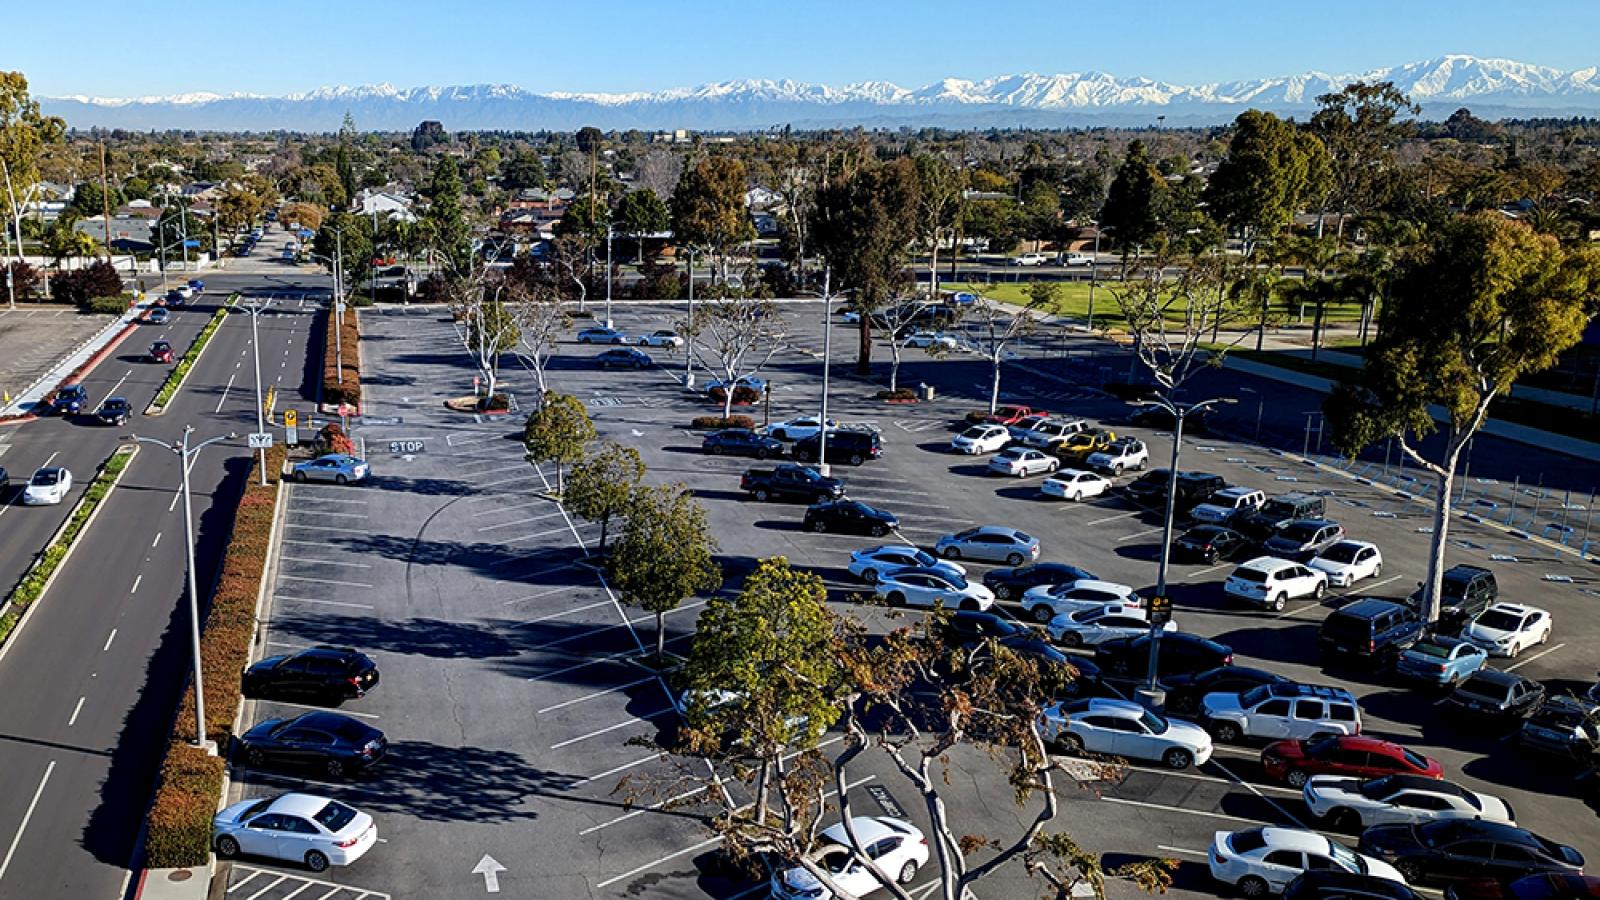 Parking lot with snowy mountains in the distance